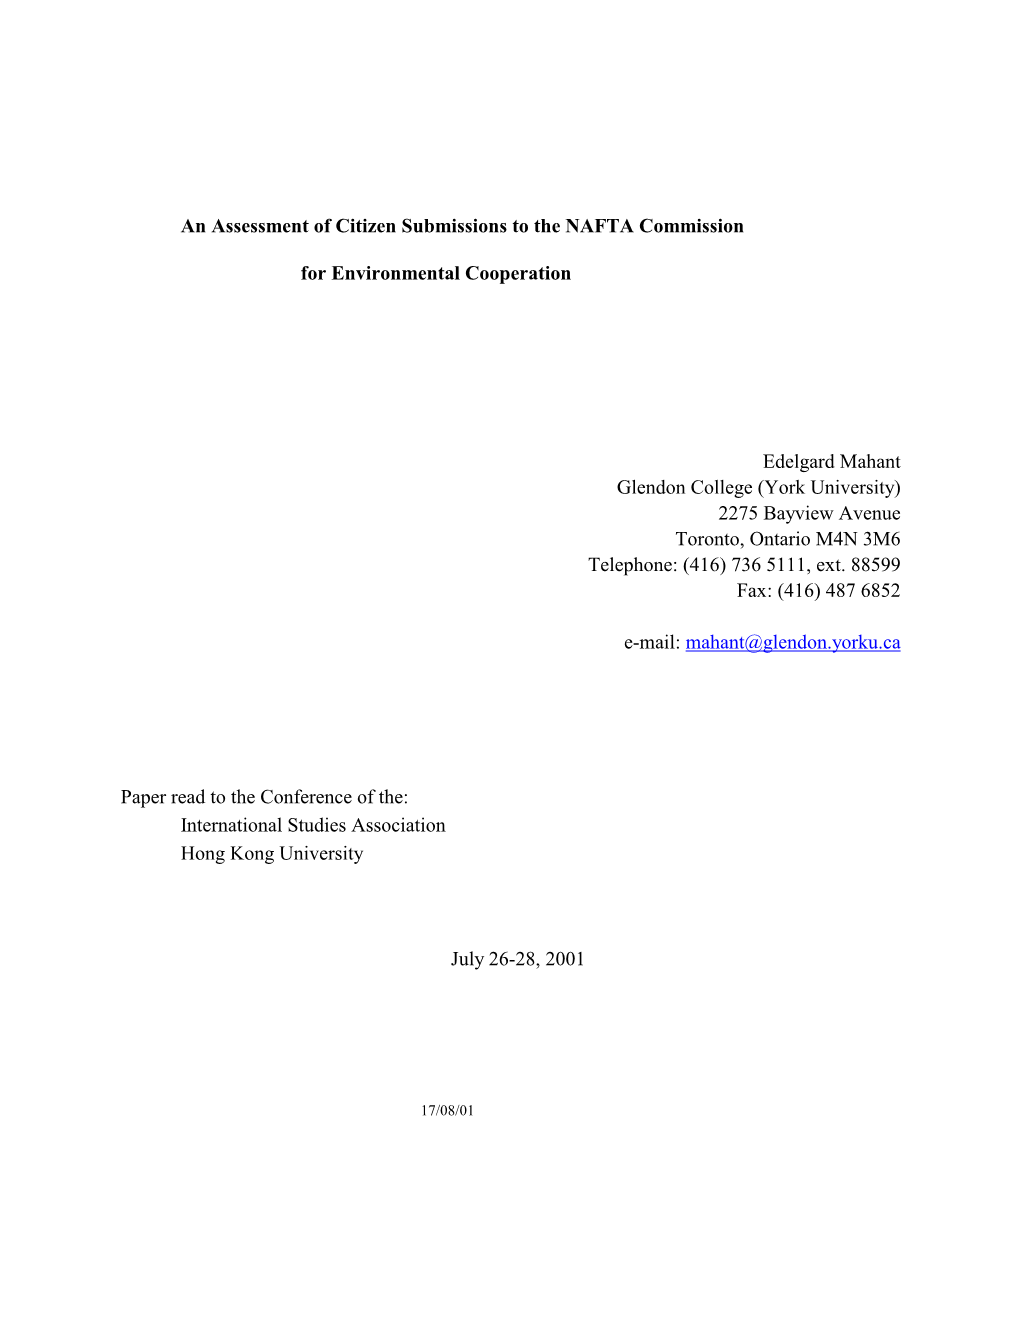 An Assessment of Citizen Submissions to the NAFTA Commission